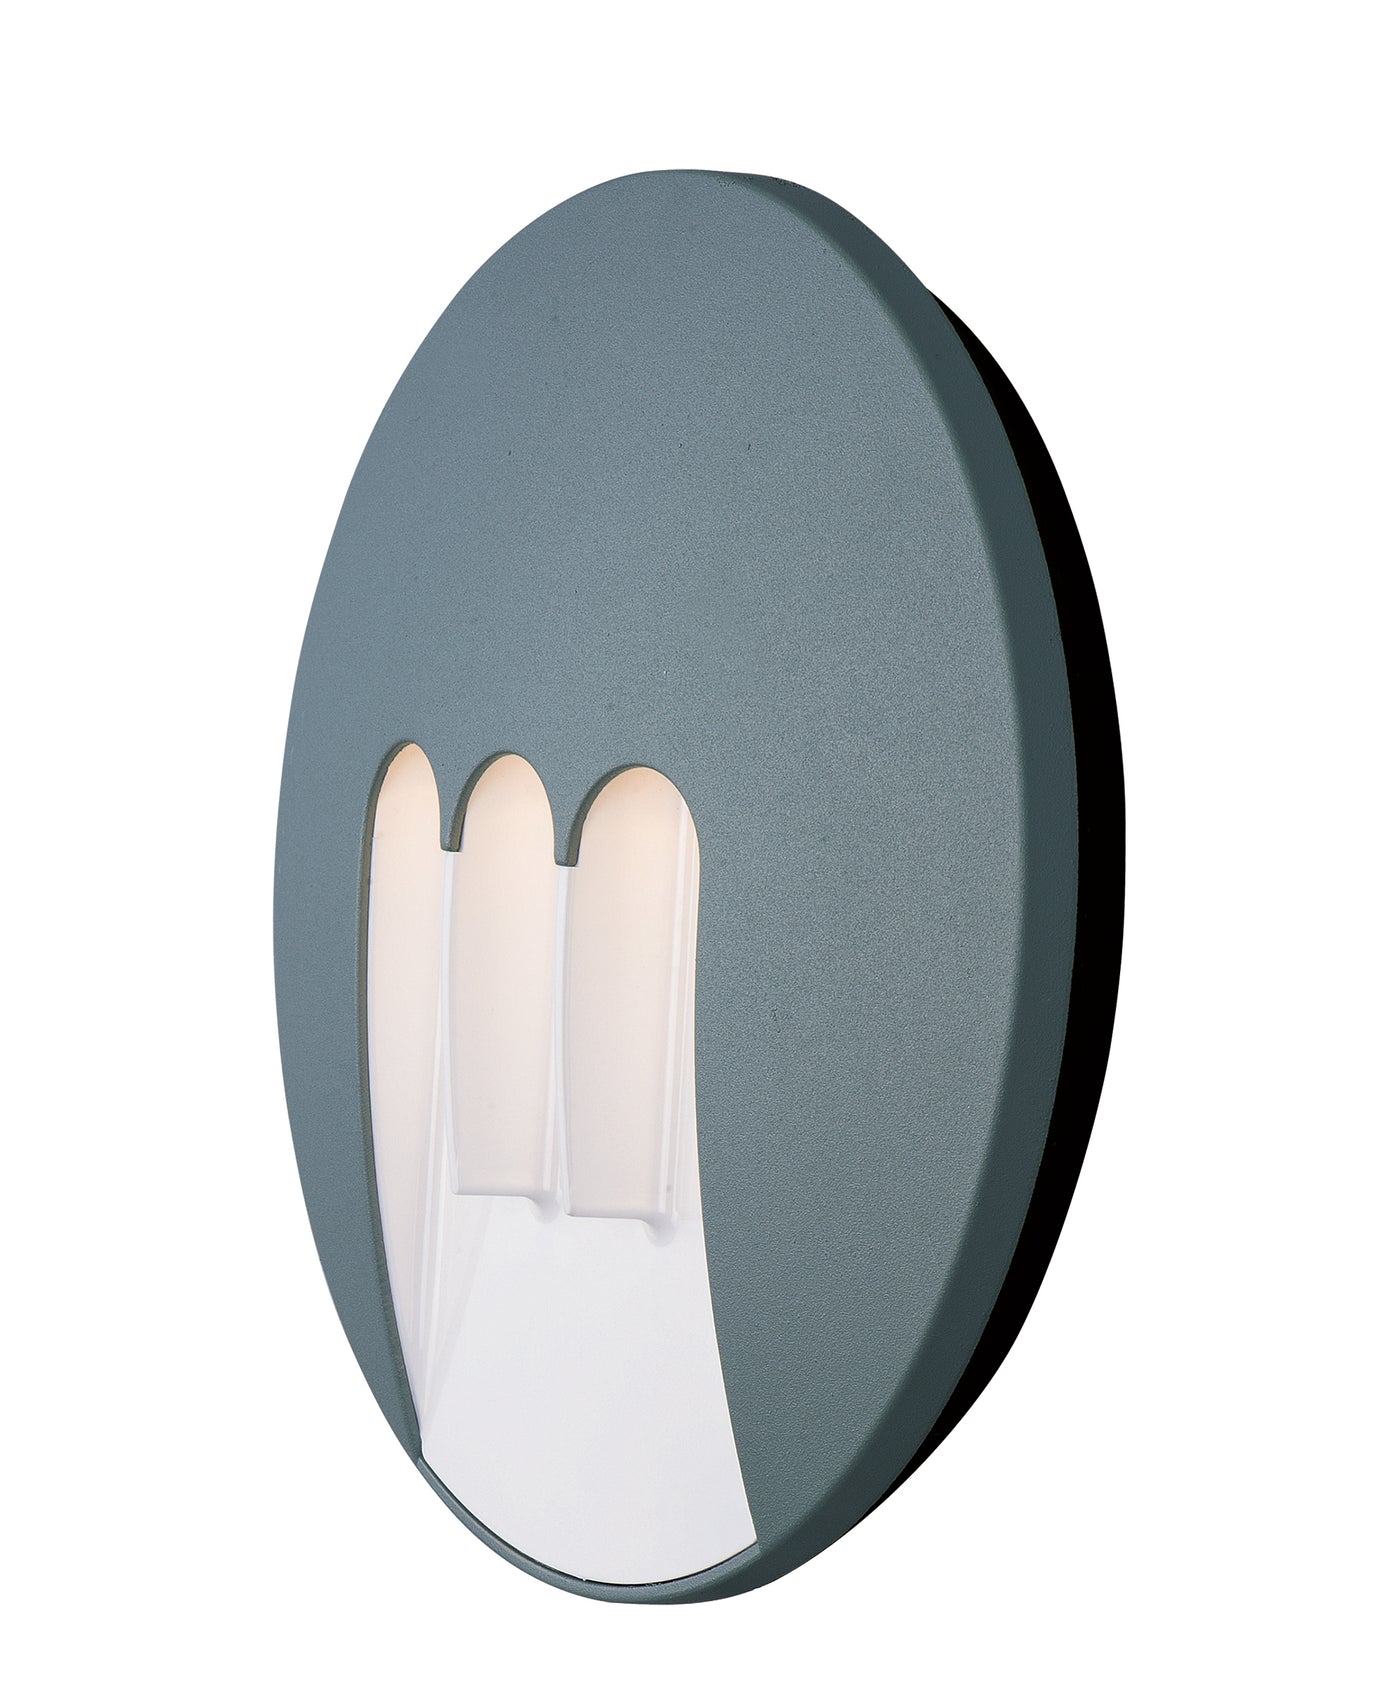  Alumilux DC LED Wall Sconce E41424-PL Wall Sconce